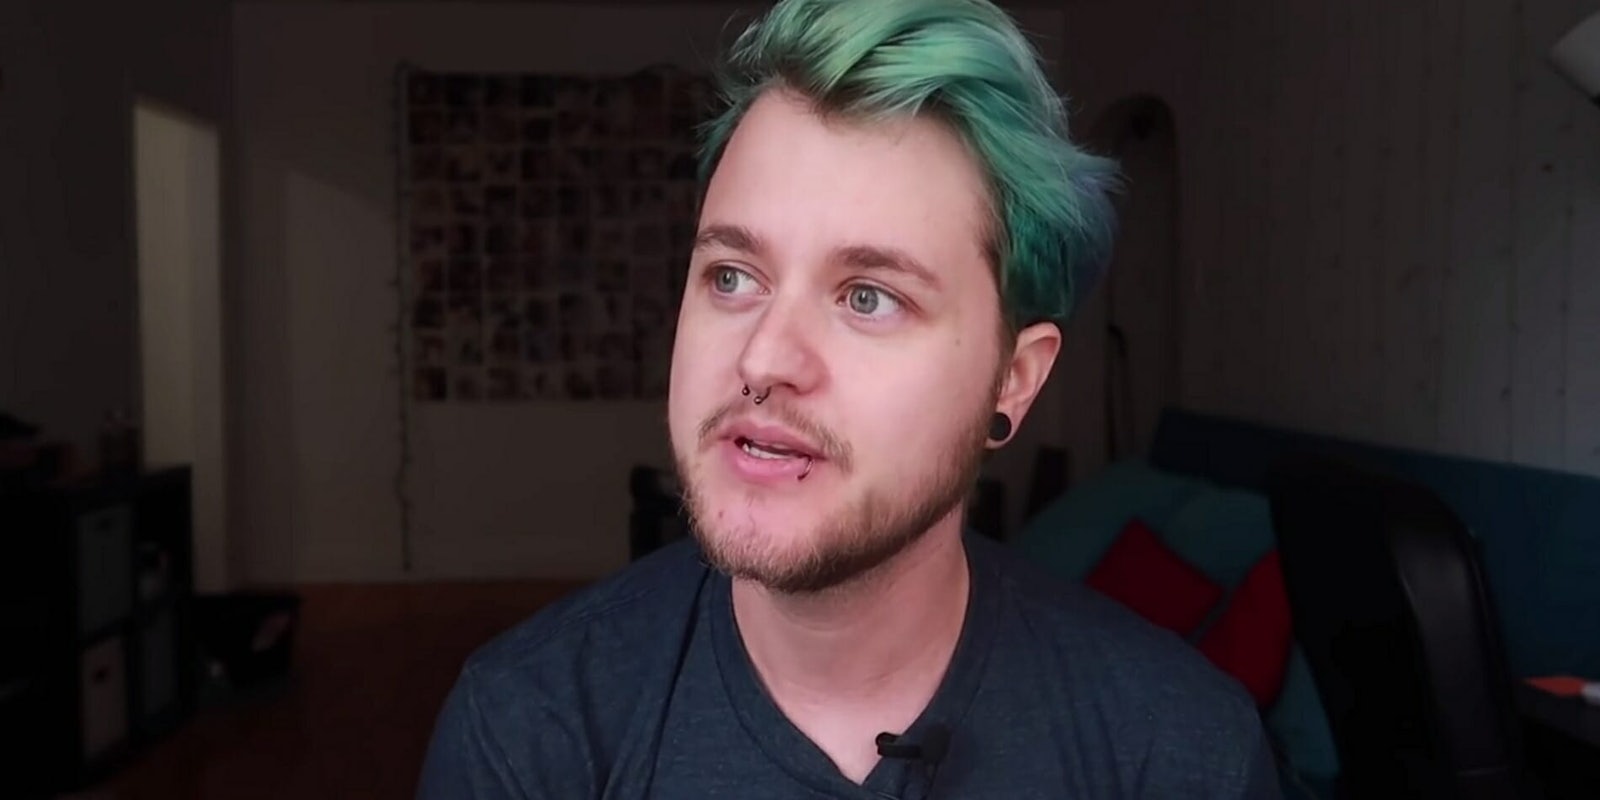 YouTuber Chase Ross claims his videos have faced demonetization over using the word 'transgender.'